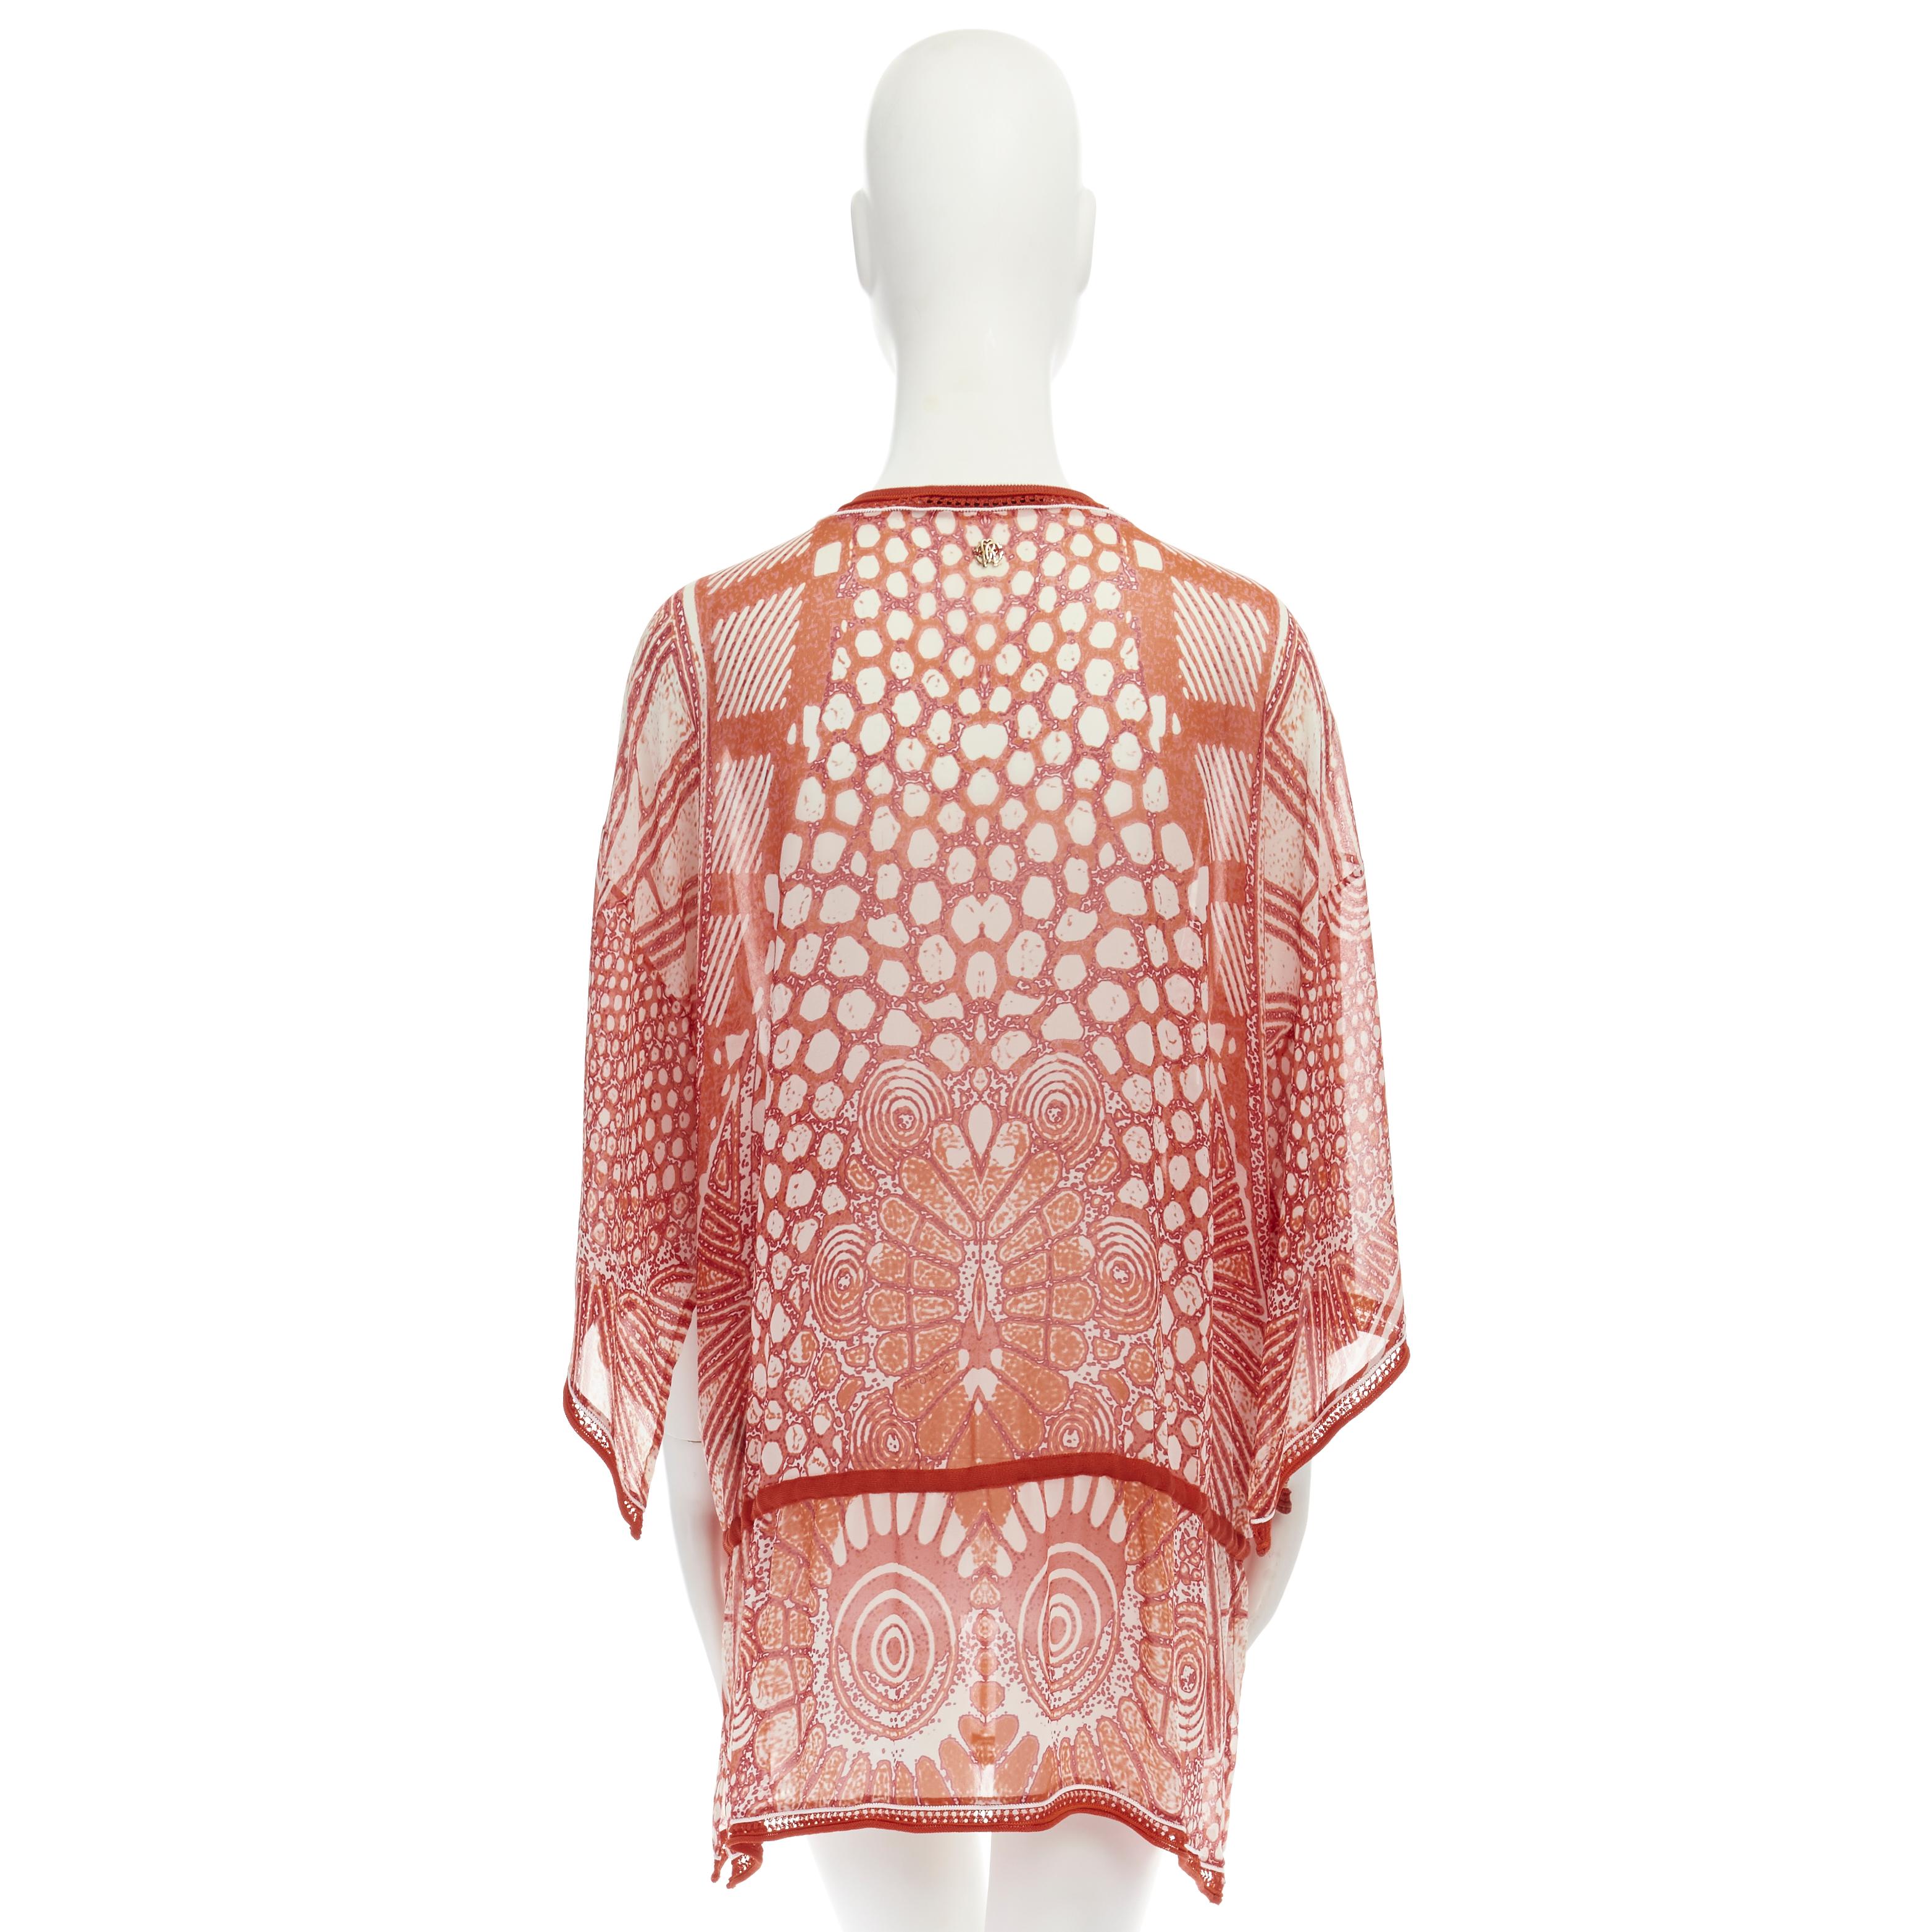 Women's ROBERTO CAVALLI 100% silk red tropical floral crochet seam poncho cover up top S